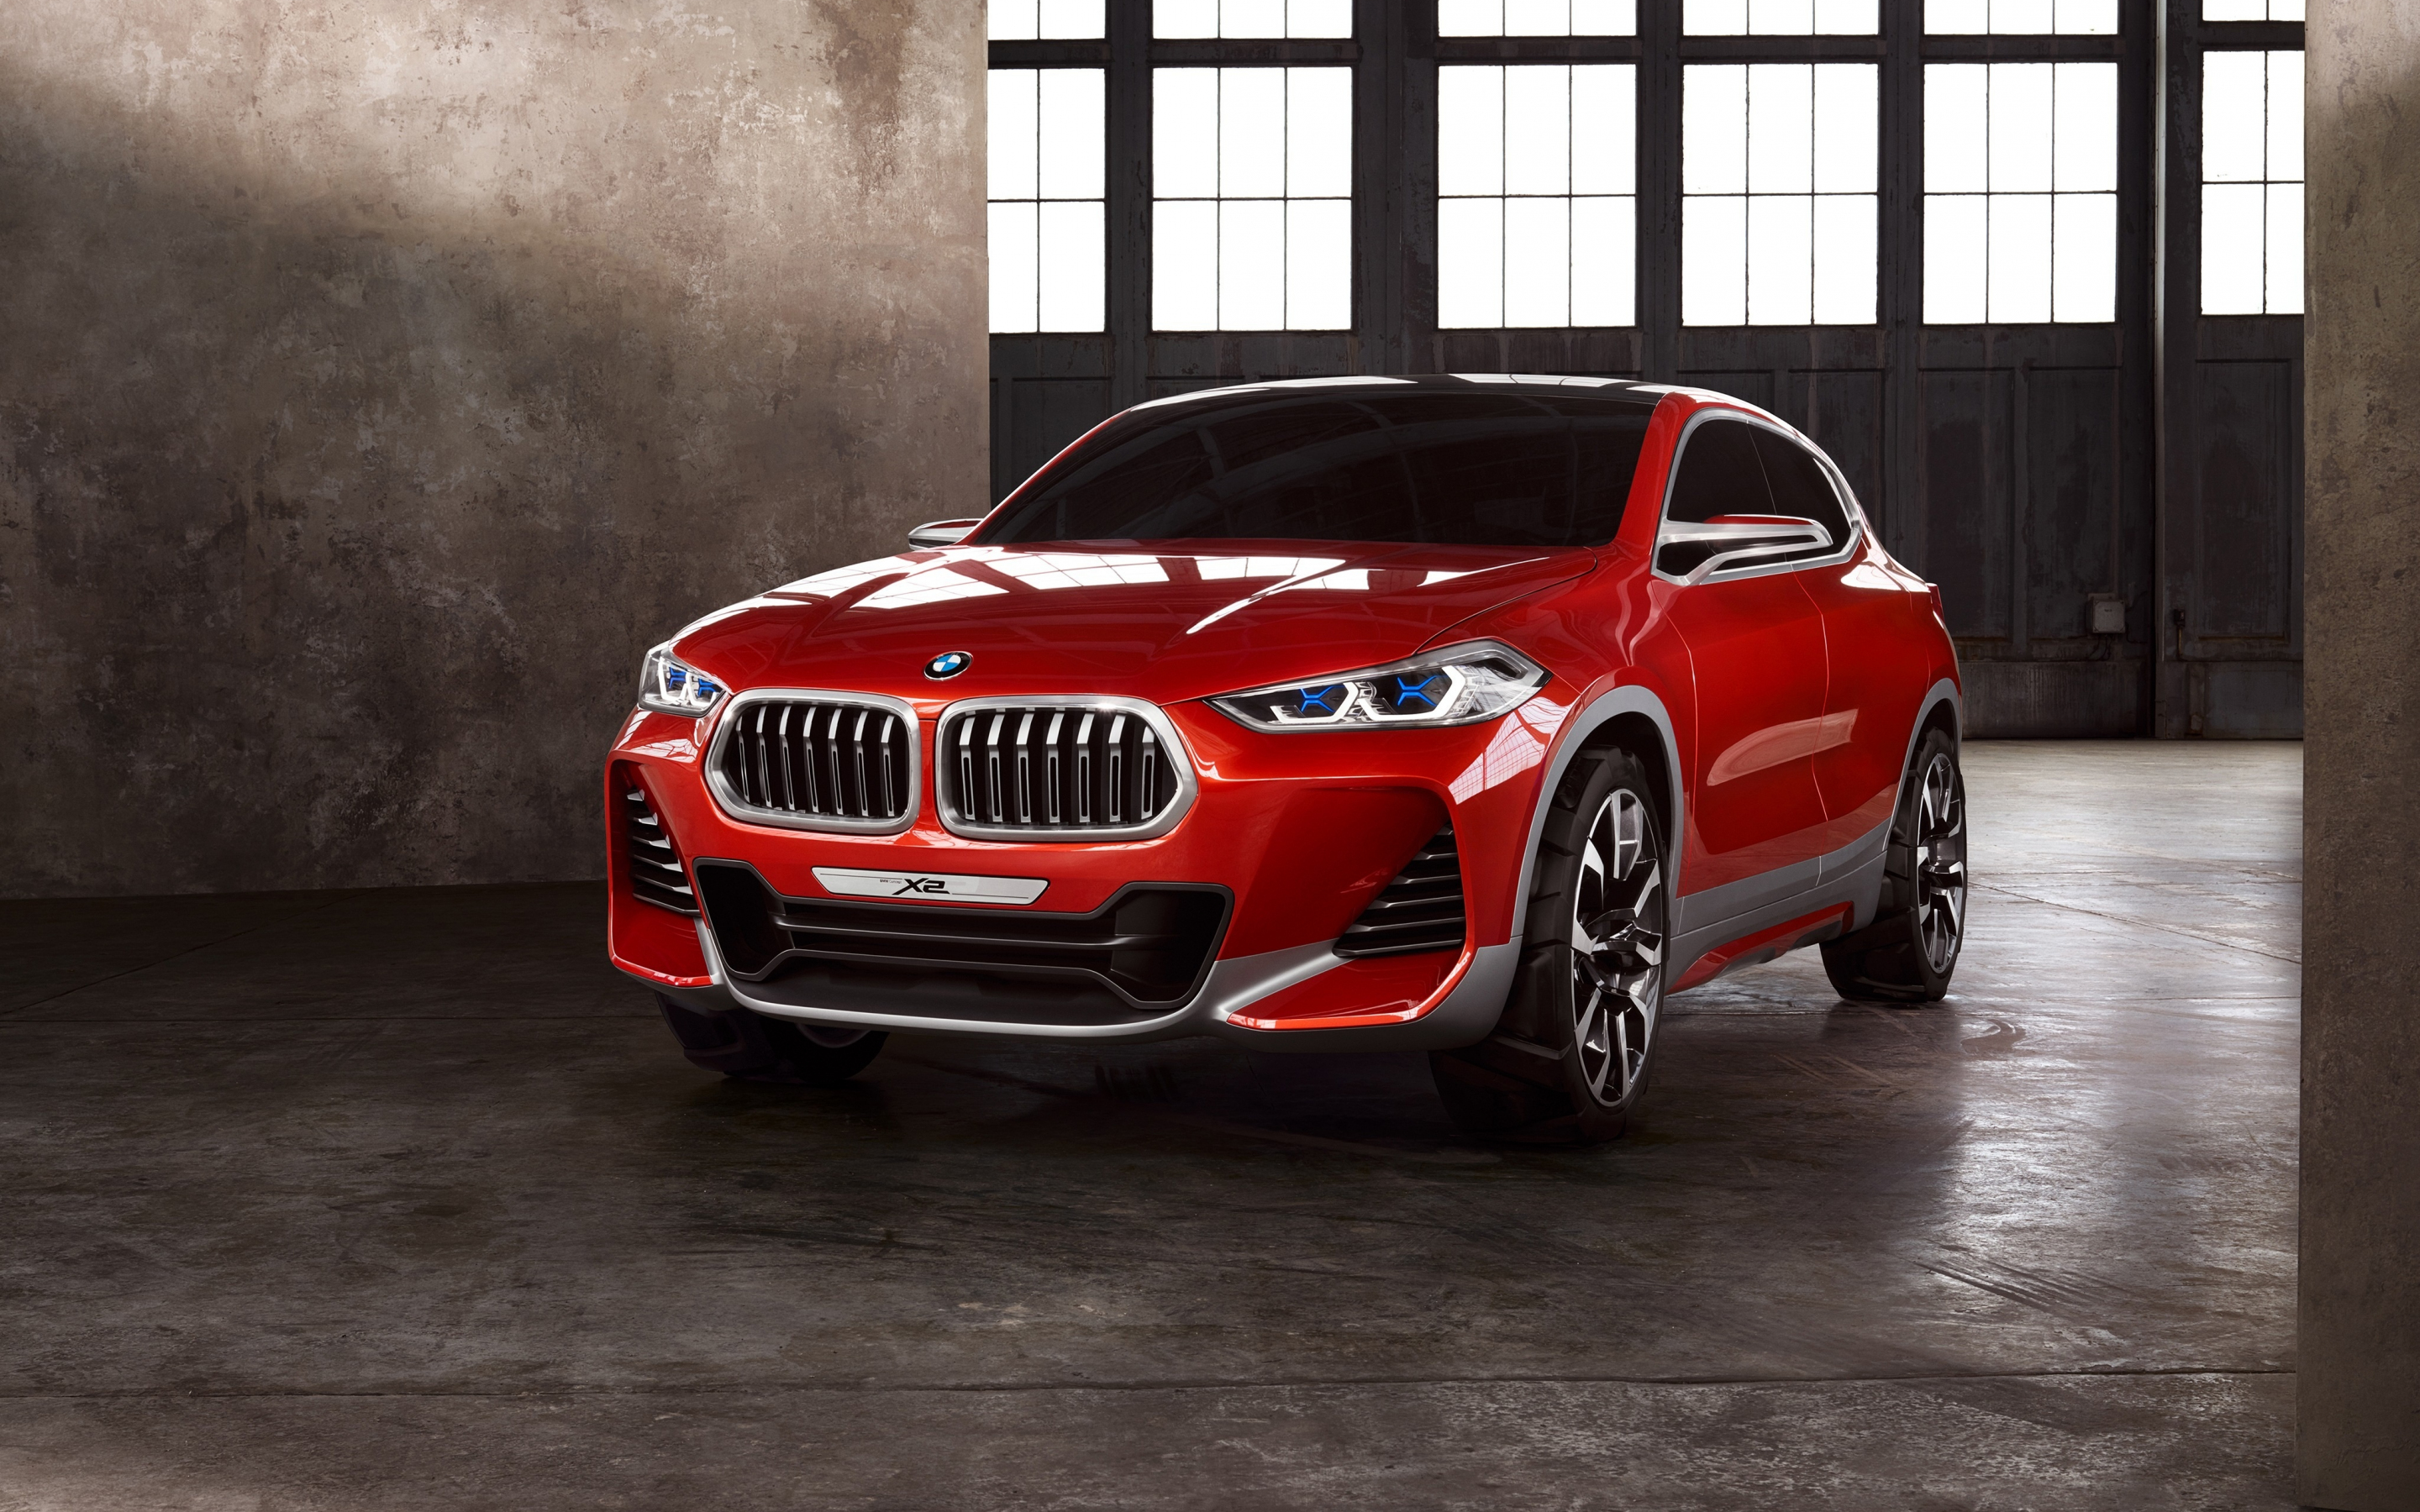 Red, front, BMW X2, 2880x1800 wallpaper